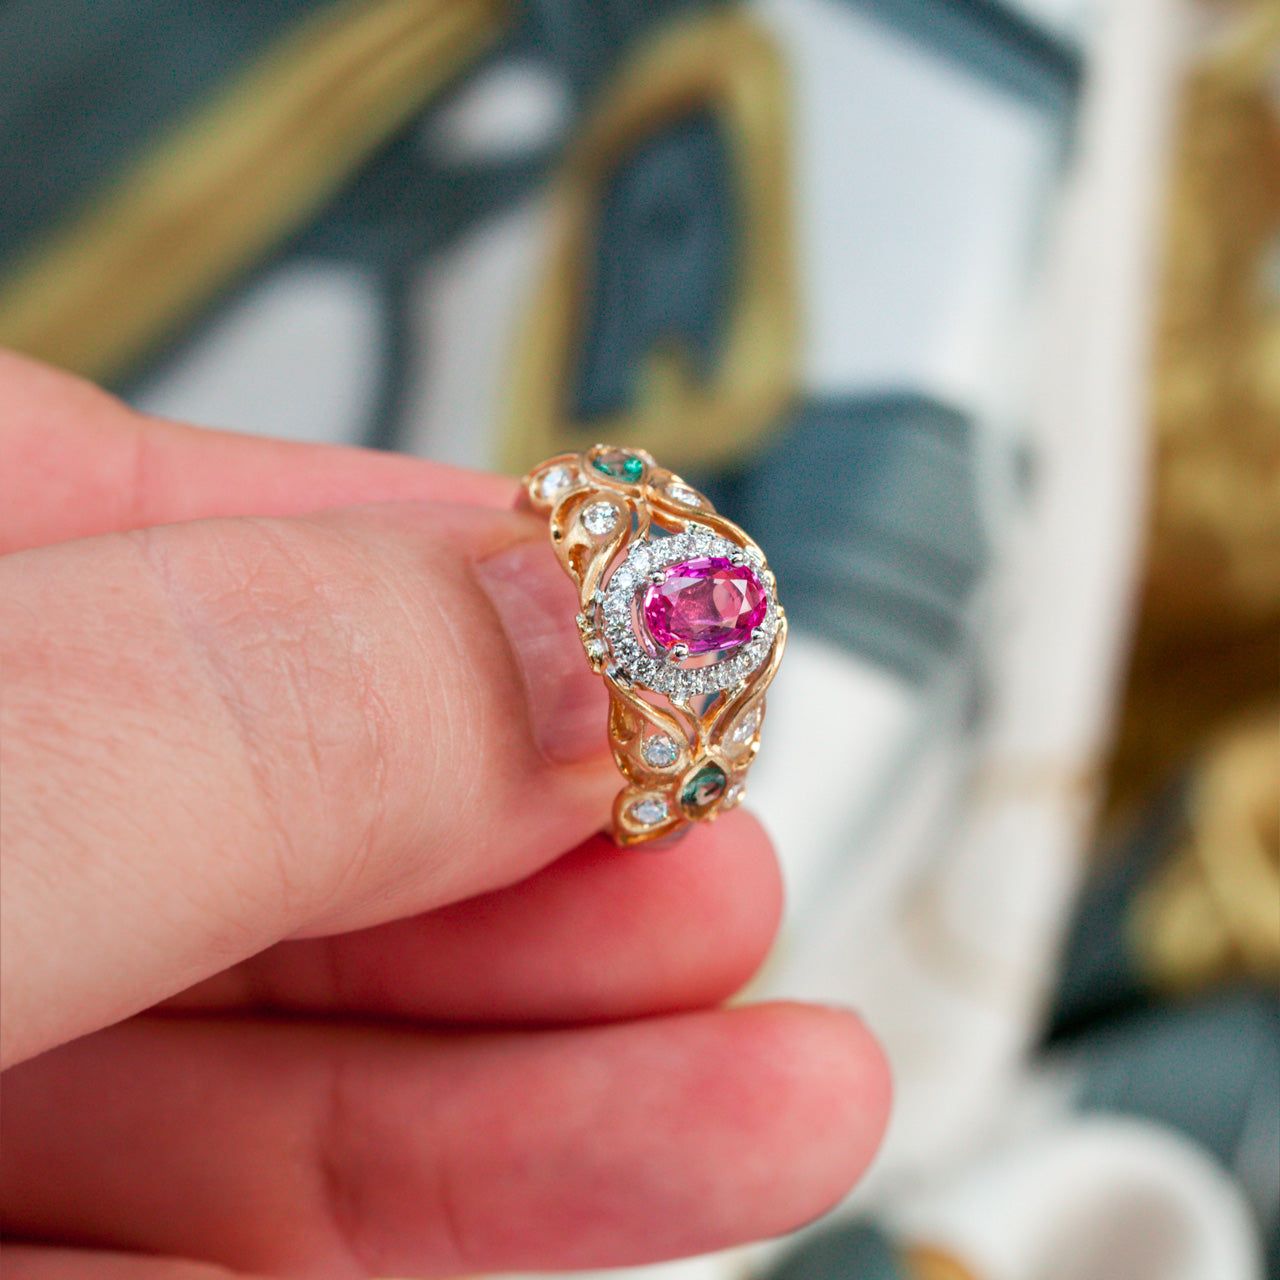 Hand holding a luxurious 0.74ct pink sapphire ring with alexandrite side stones set in 18k gold